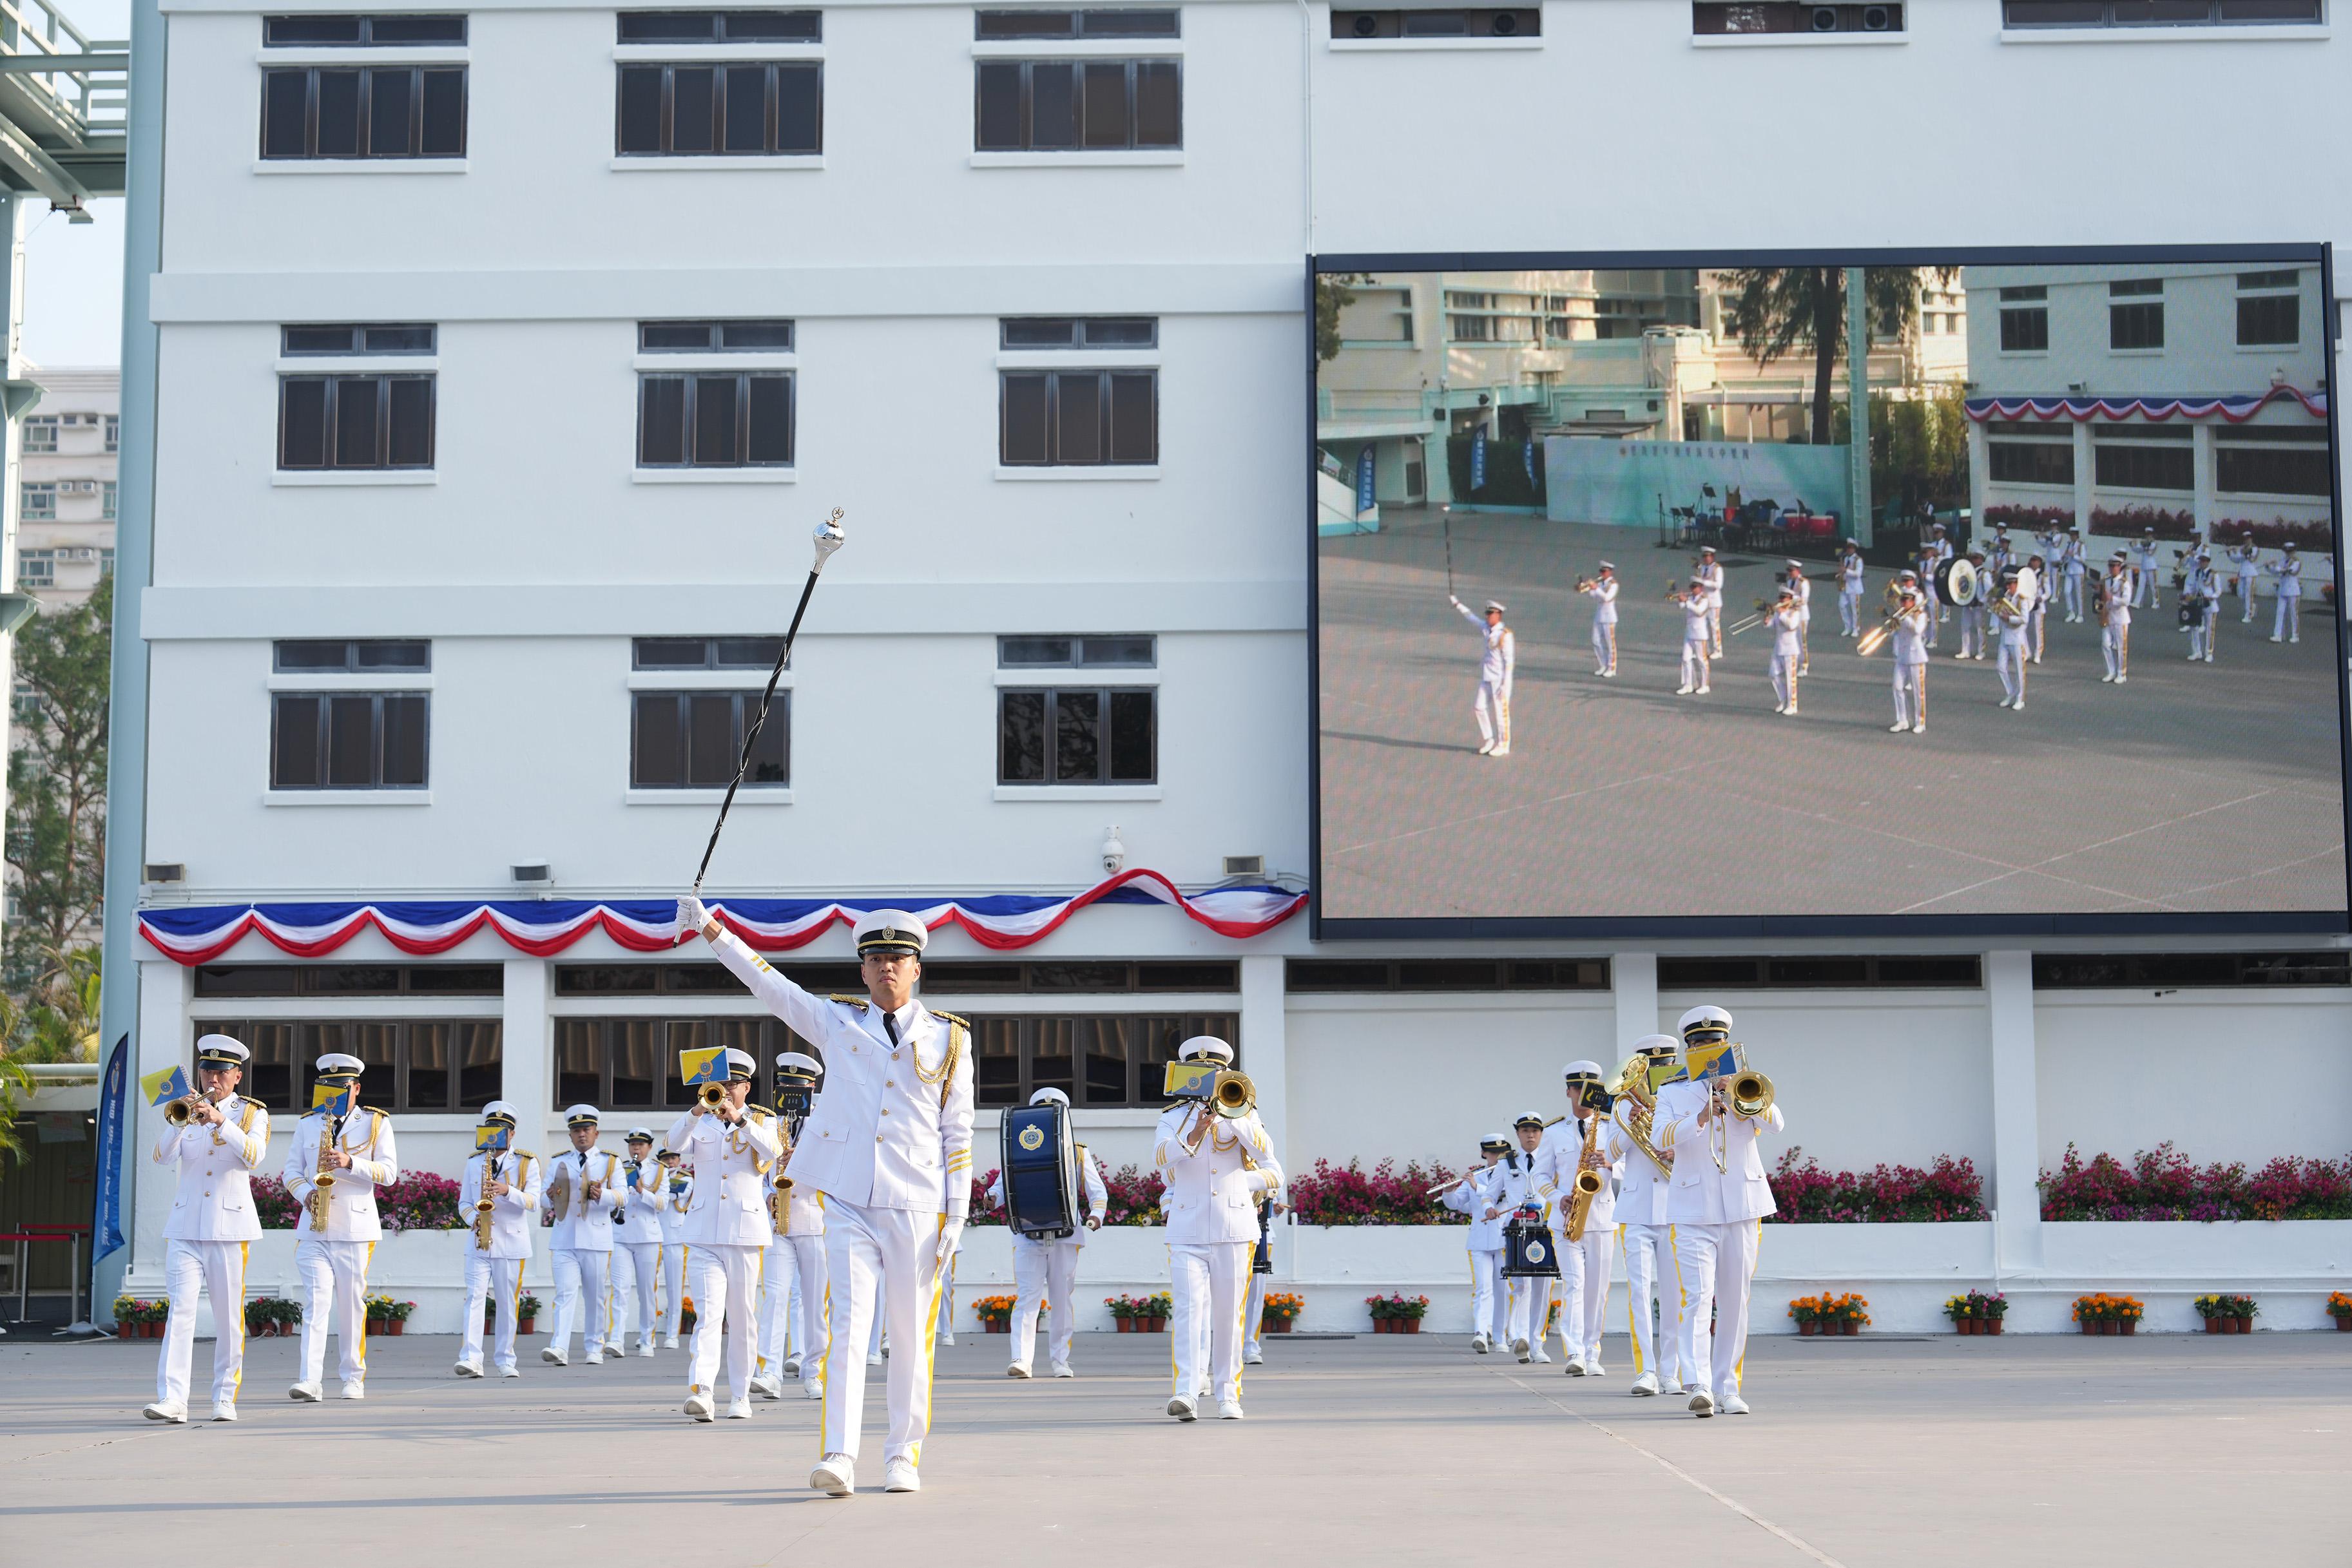 The Correctional Services Department held a passing-out parade at the Hong Kong Correctional Services Academy today (November 24). Photo shows a music performance by the Marching Band.